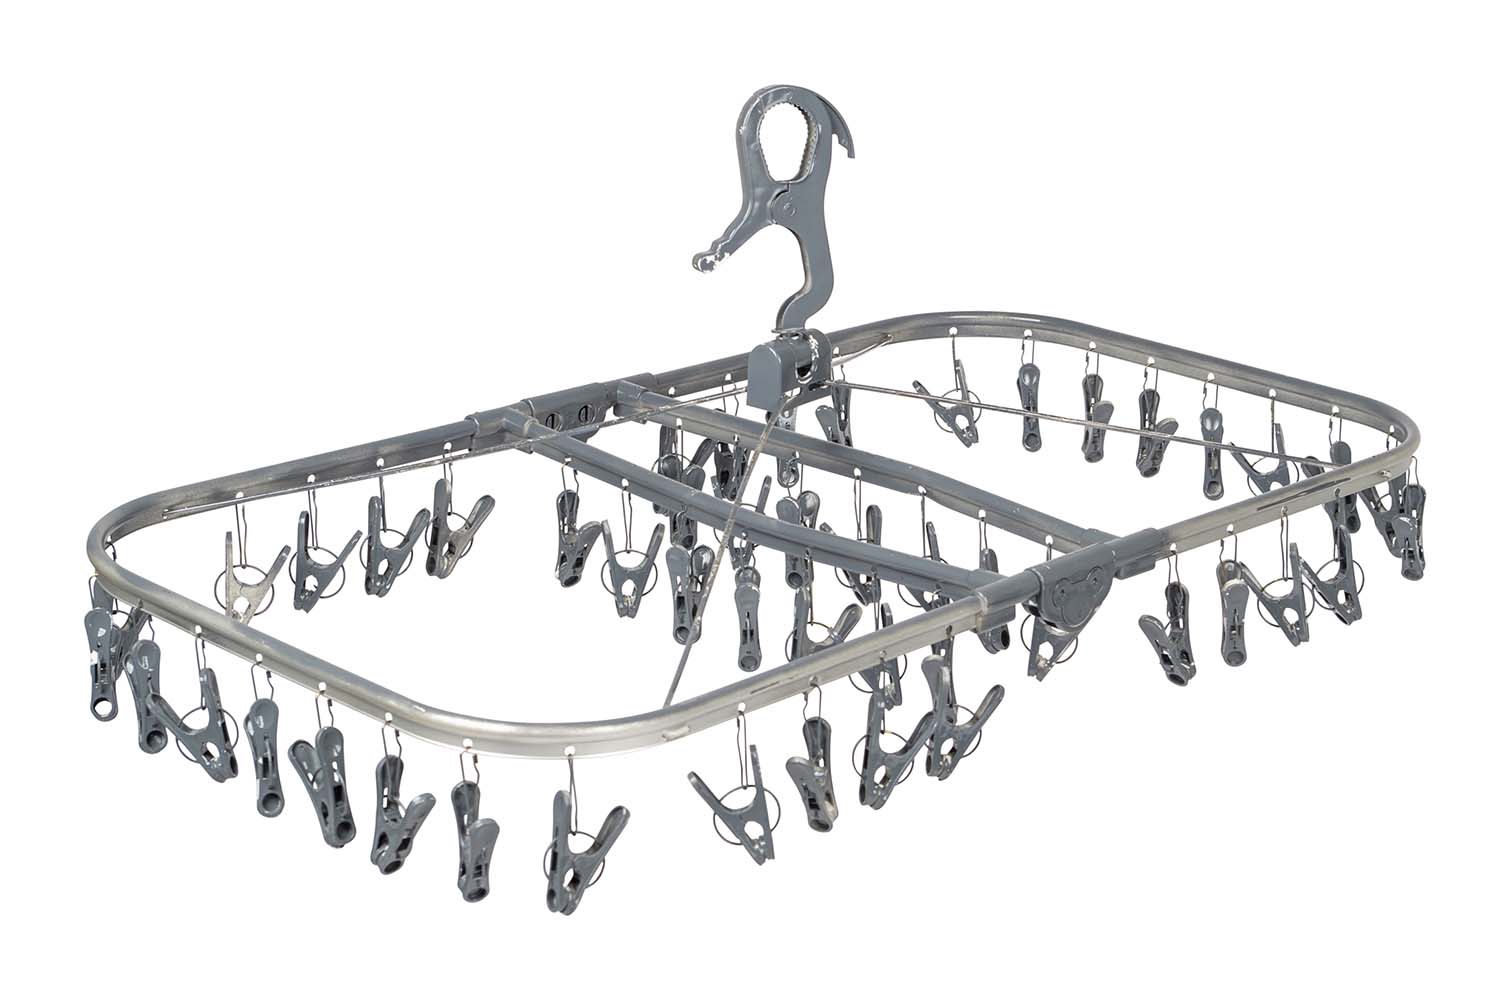 6415158 A rectangular large drying carousel made of high quality aluminum. Can be fixed in many places by the suspension hook. Lightweight and very easy to fold. Has 48 clothespins.